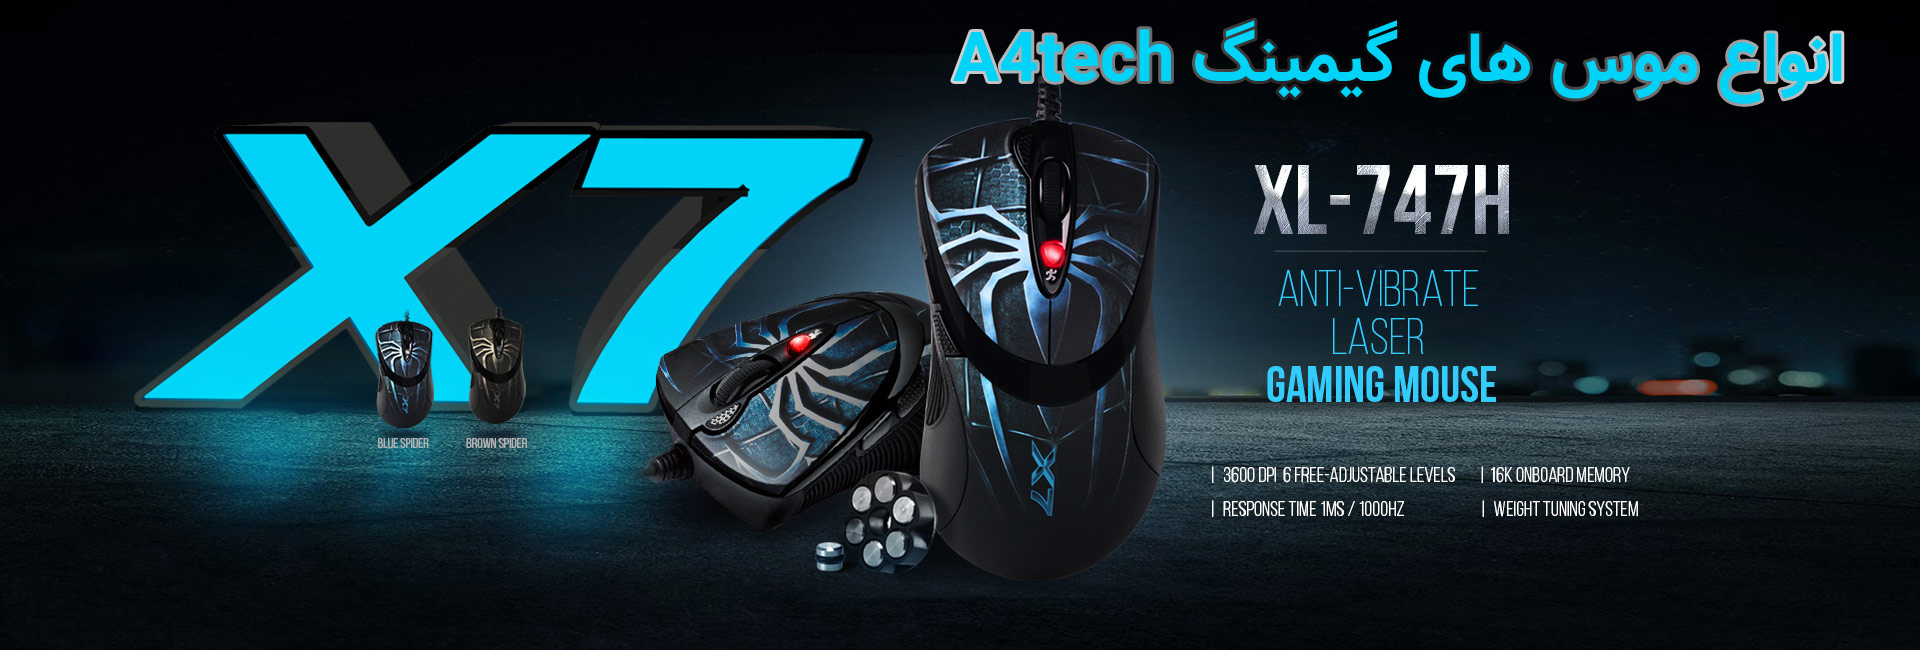 A4Tech XL 747H Gaming Mouse%20(6)